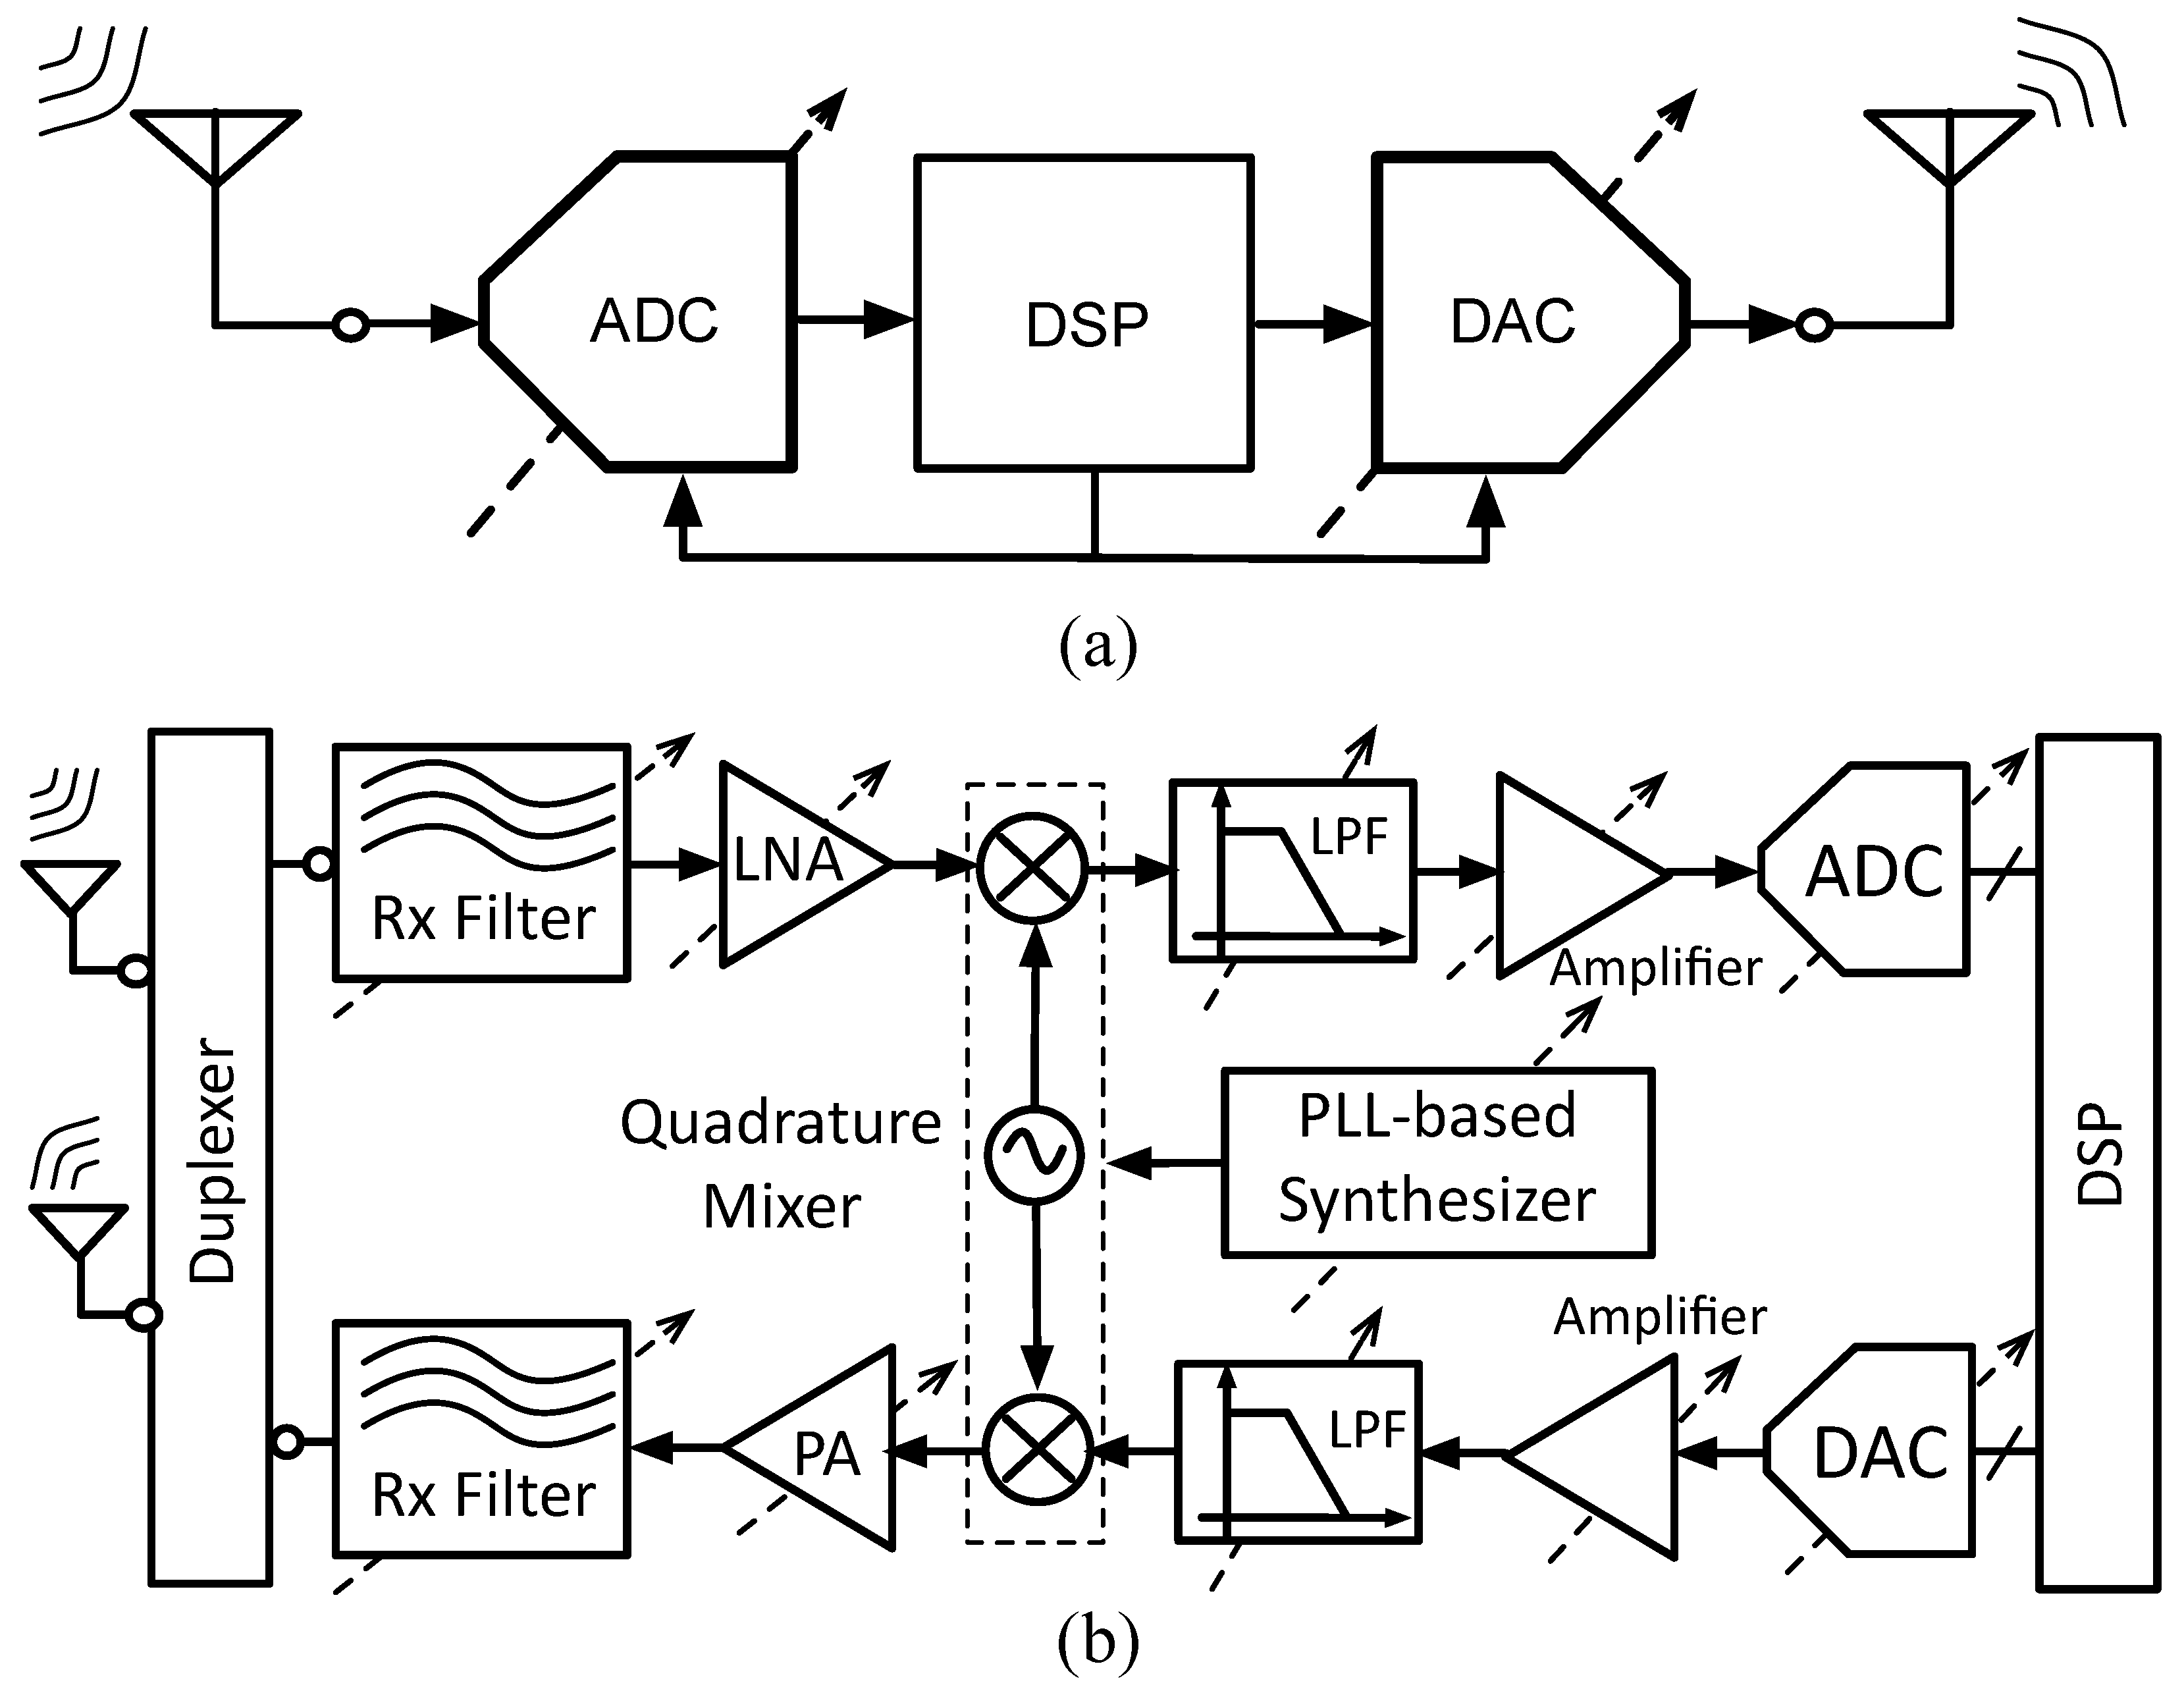 Concept of Software-Defined Radio (SDR) receiver as defined by Mitola